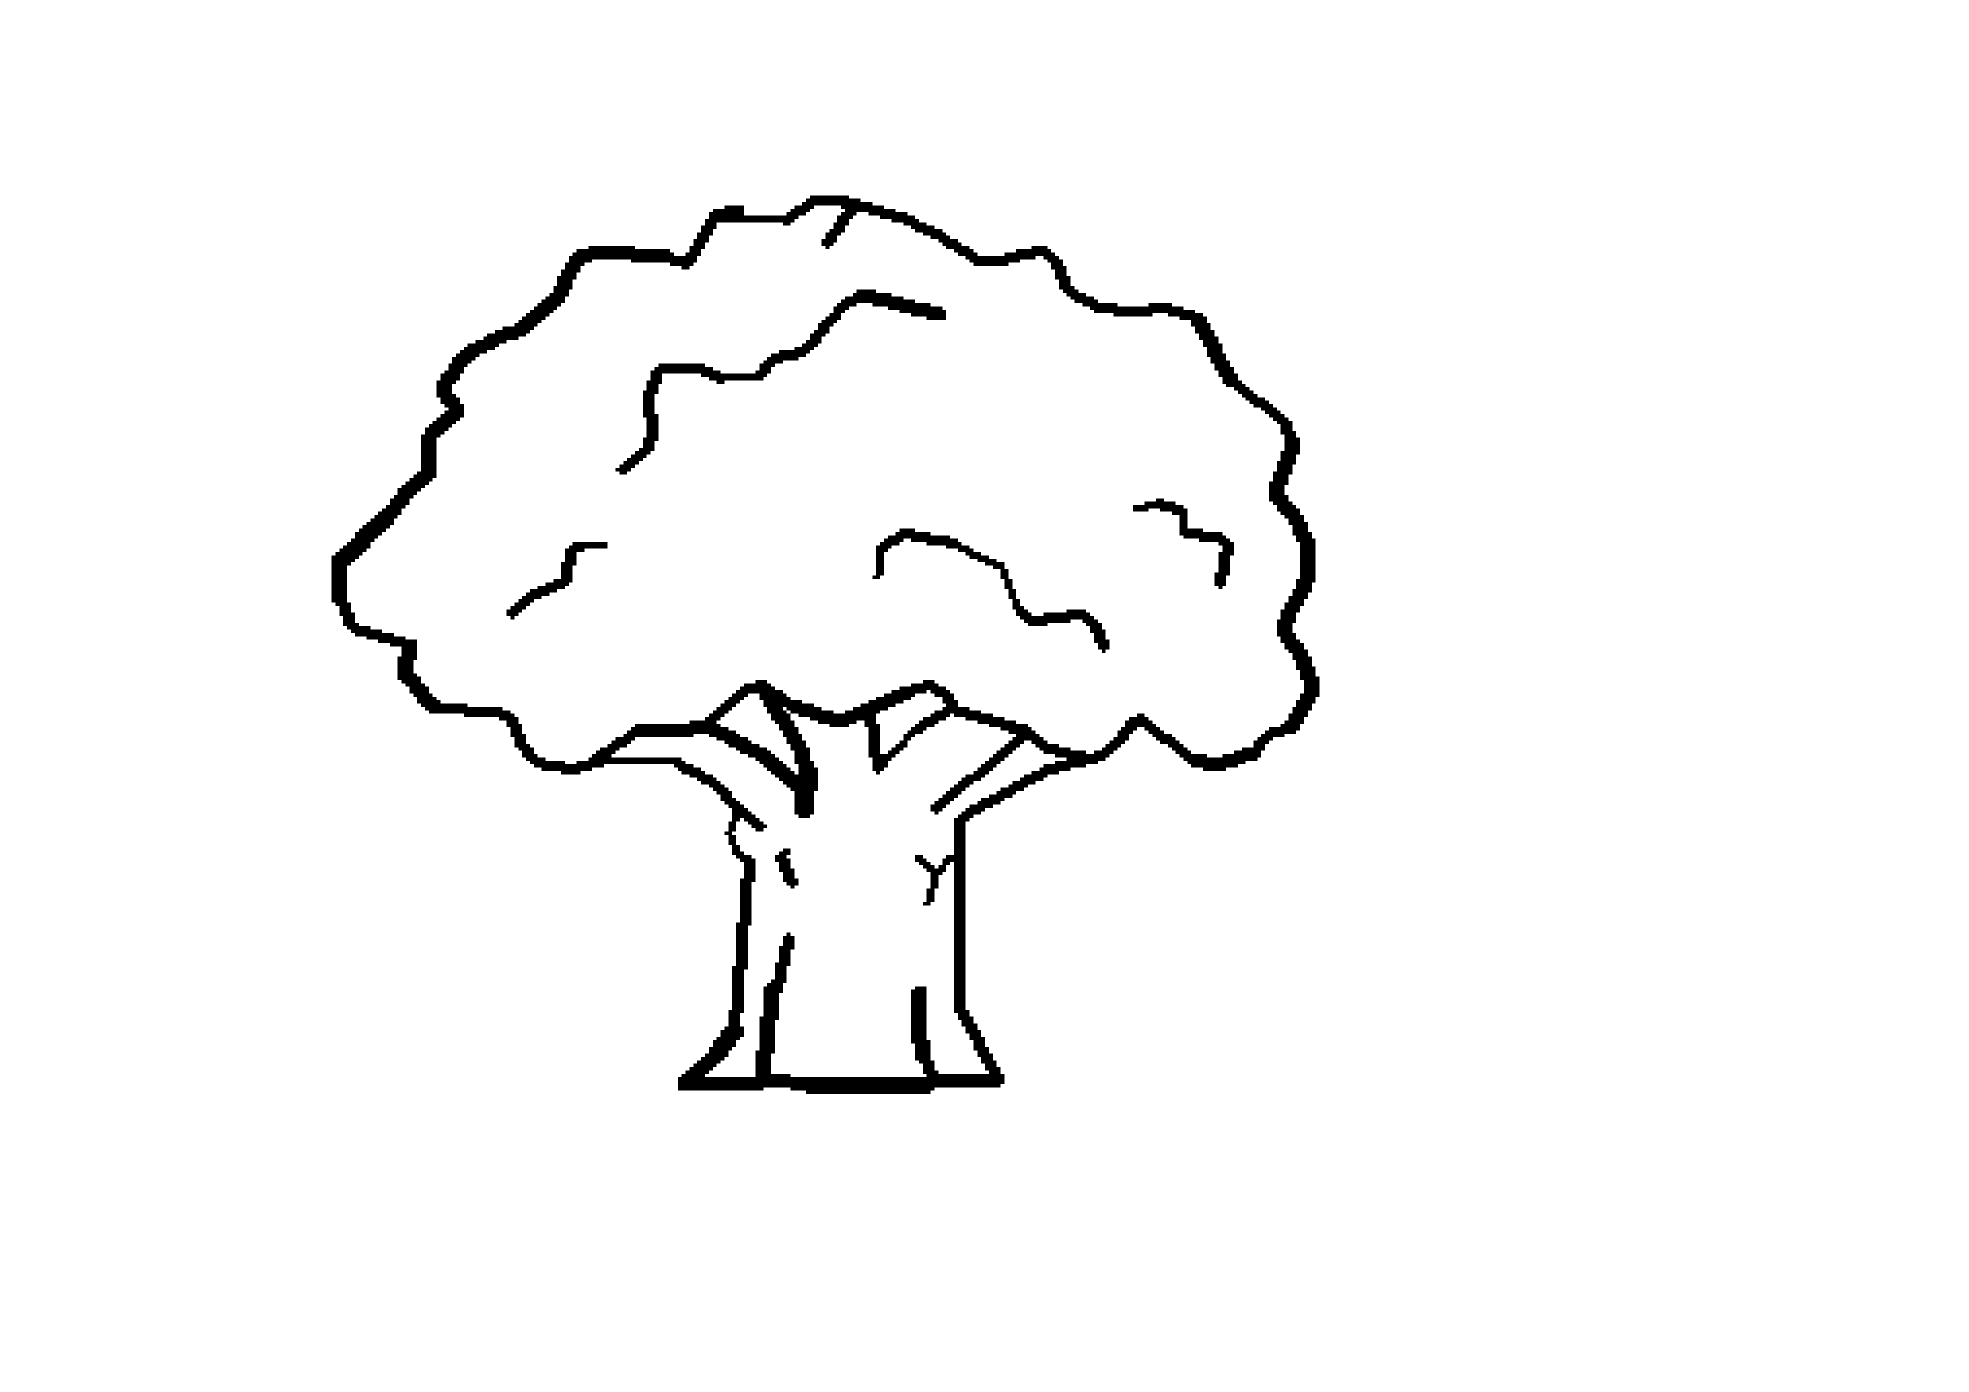 Clip Art: Tree Scalable Vector Graphics SVG  - Clipart library 